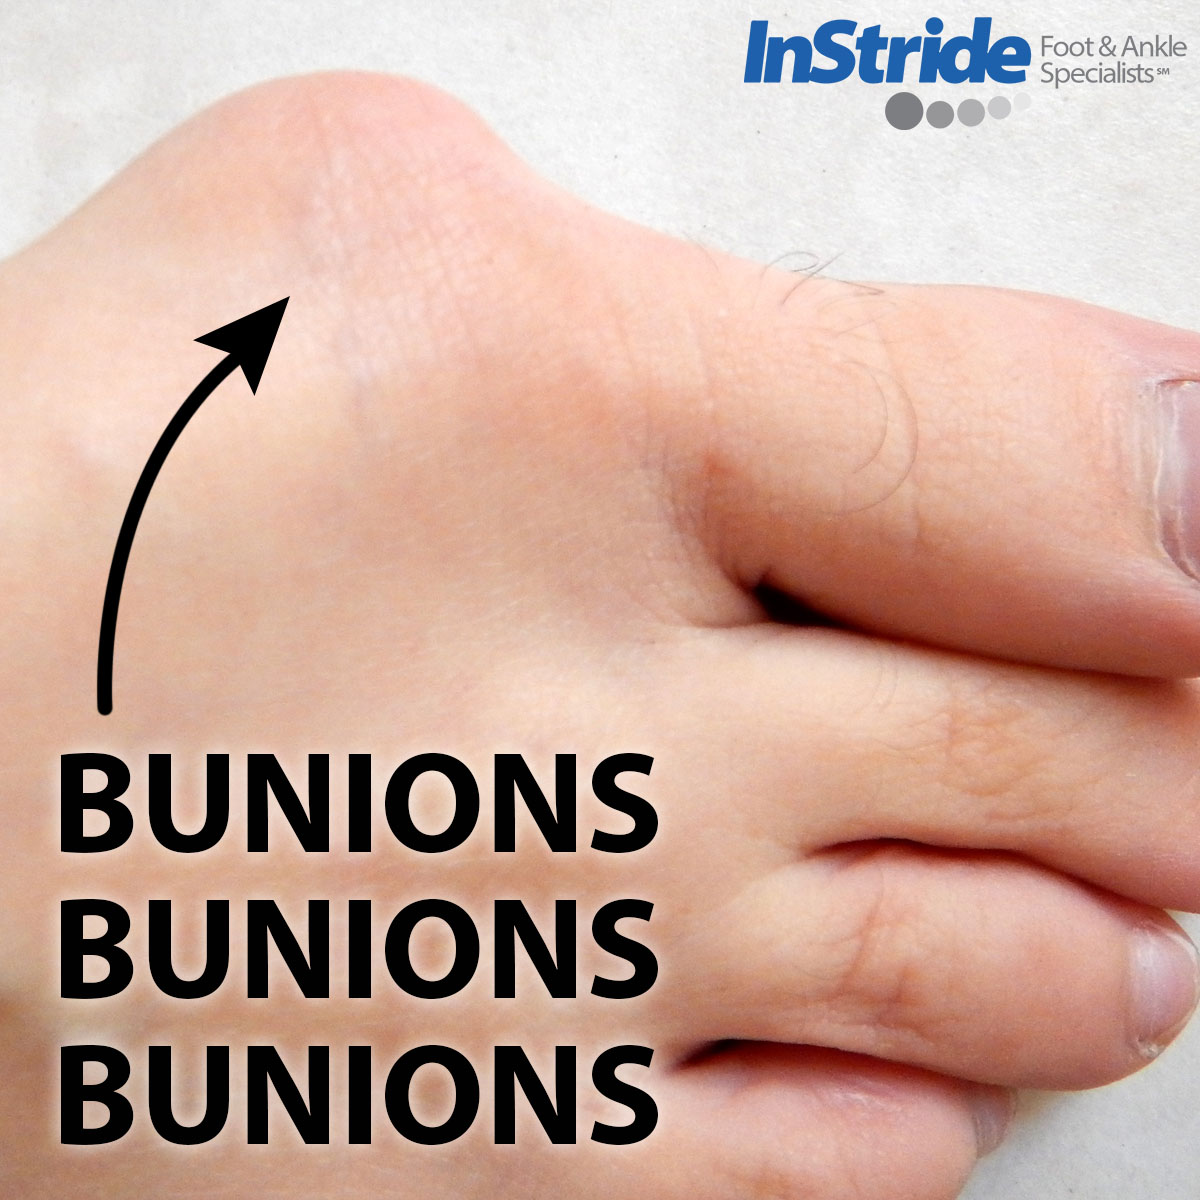 You are currently viewing Bunions Bunions Bunions & Same Day Surgery